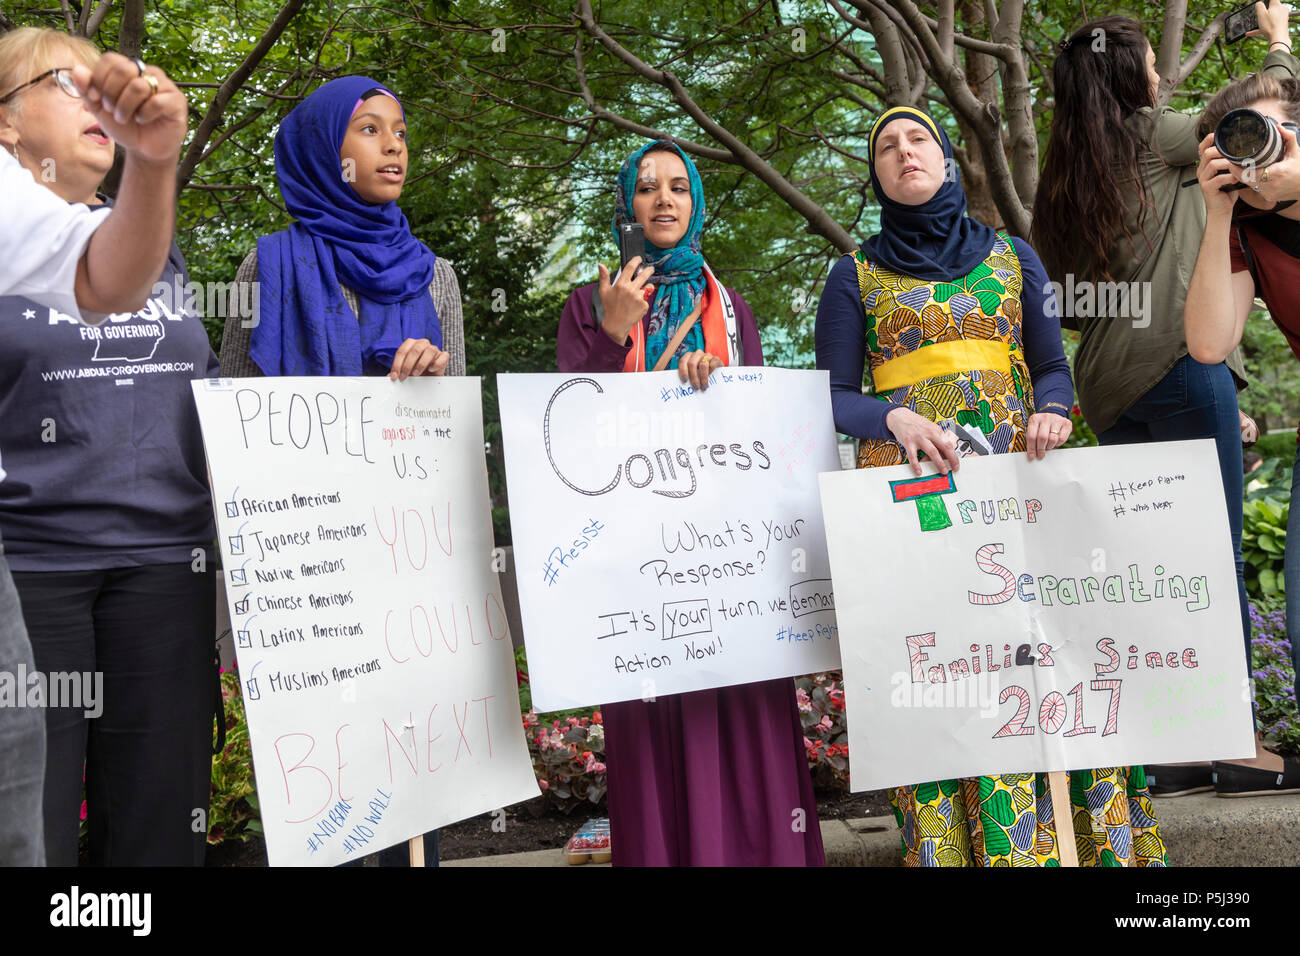 Detroit, Michigan USA - 26 June 2018 - People gather in Campus Martius Park to protest the Supreme Court's decision upholding President Trump's Muslim travel ban. Credit: Jim West/Alamy Live News Stock Photo